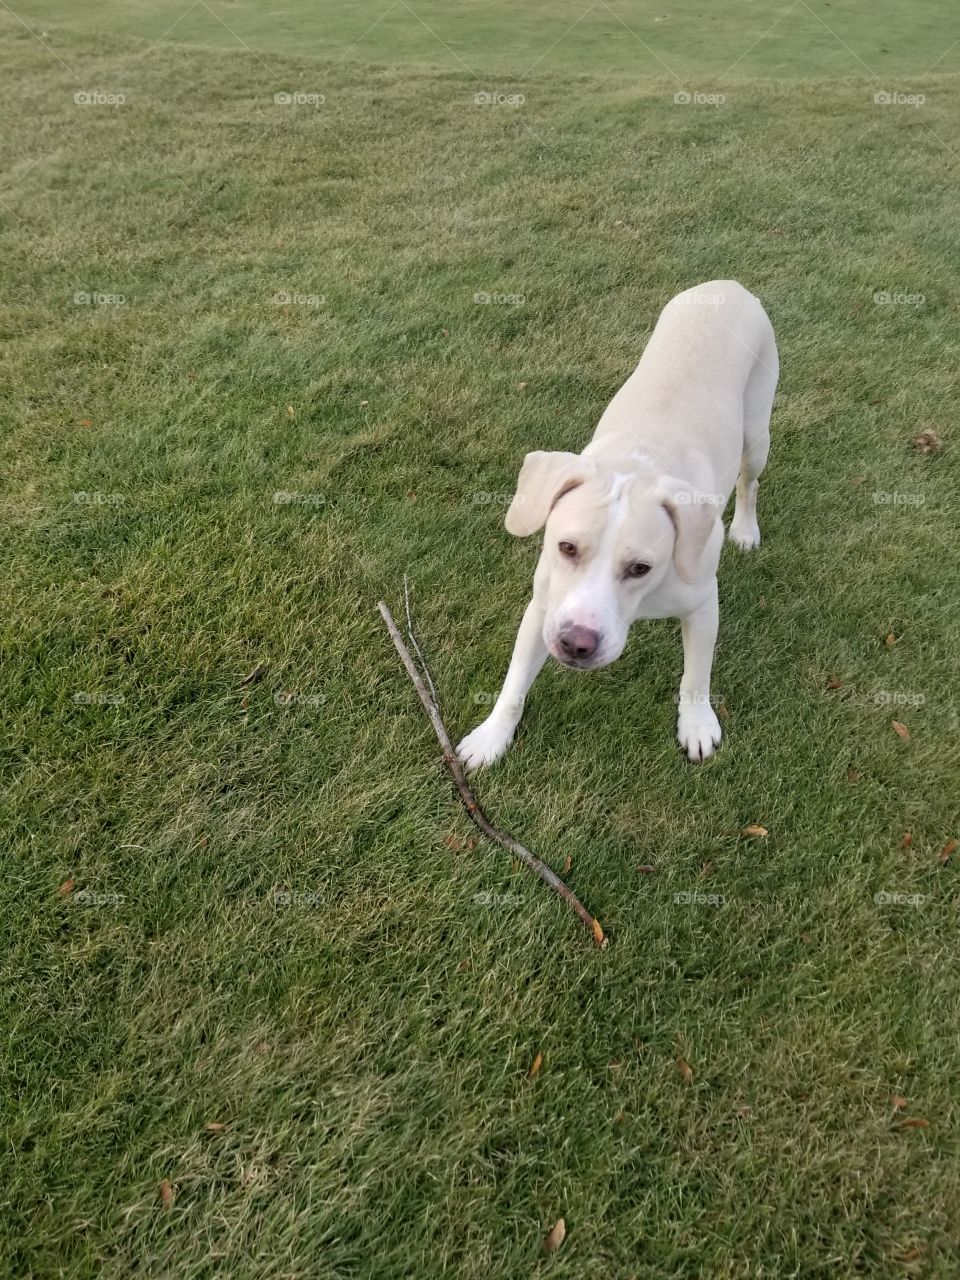 stick games with the puppy